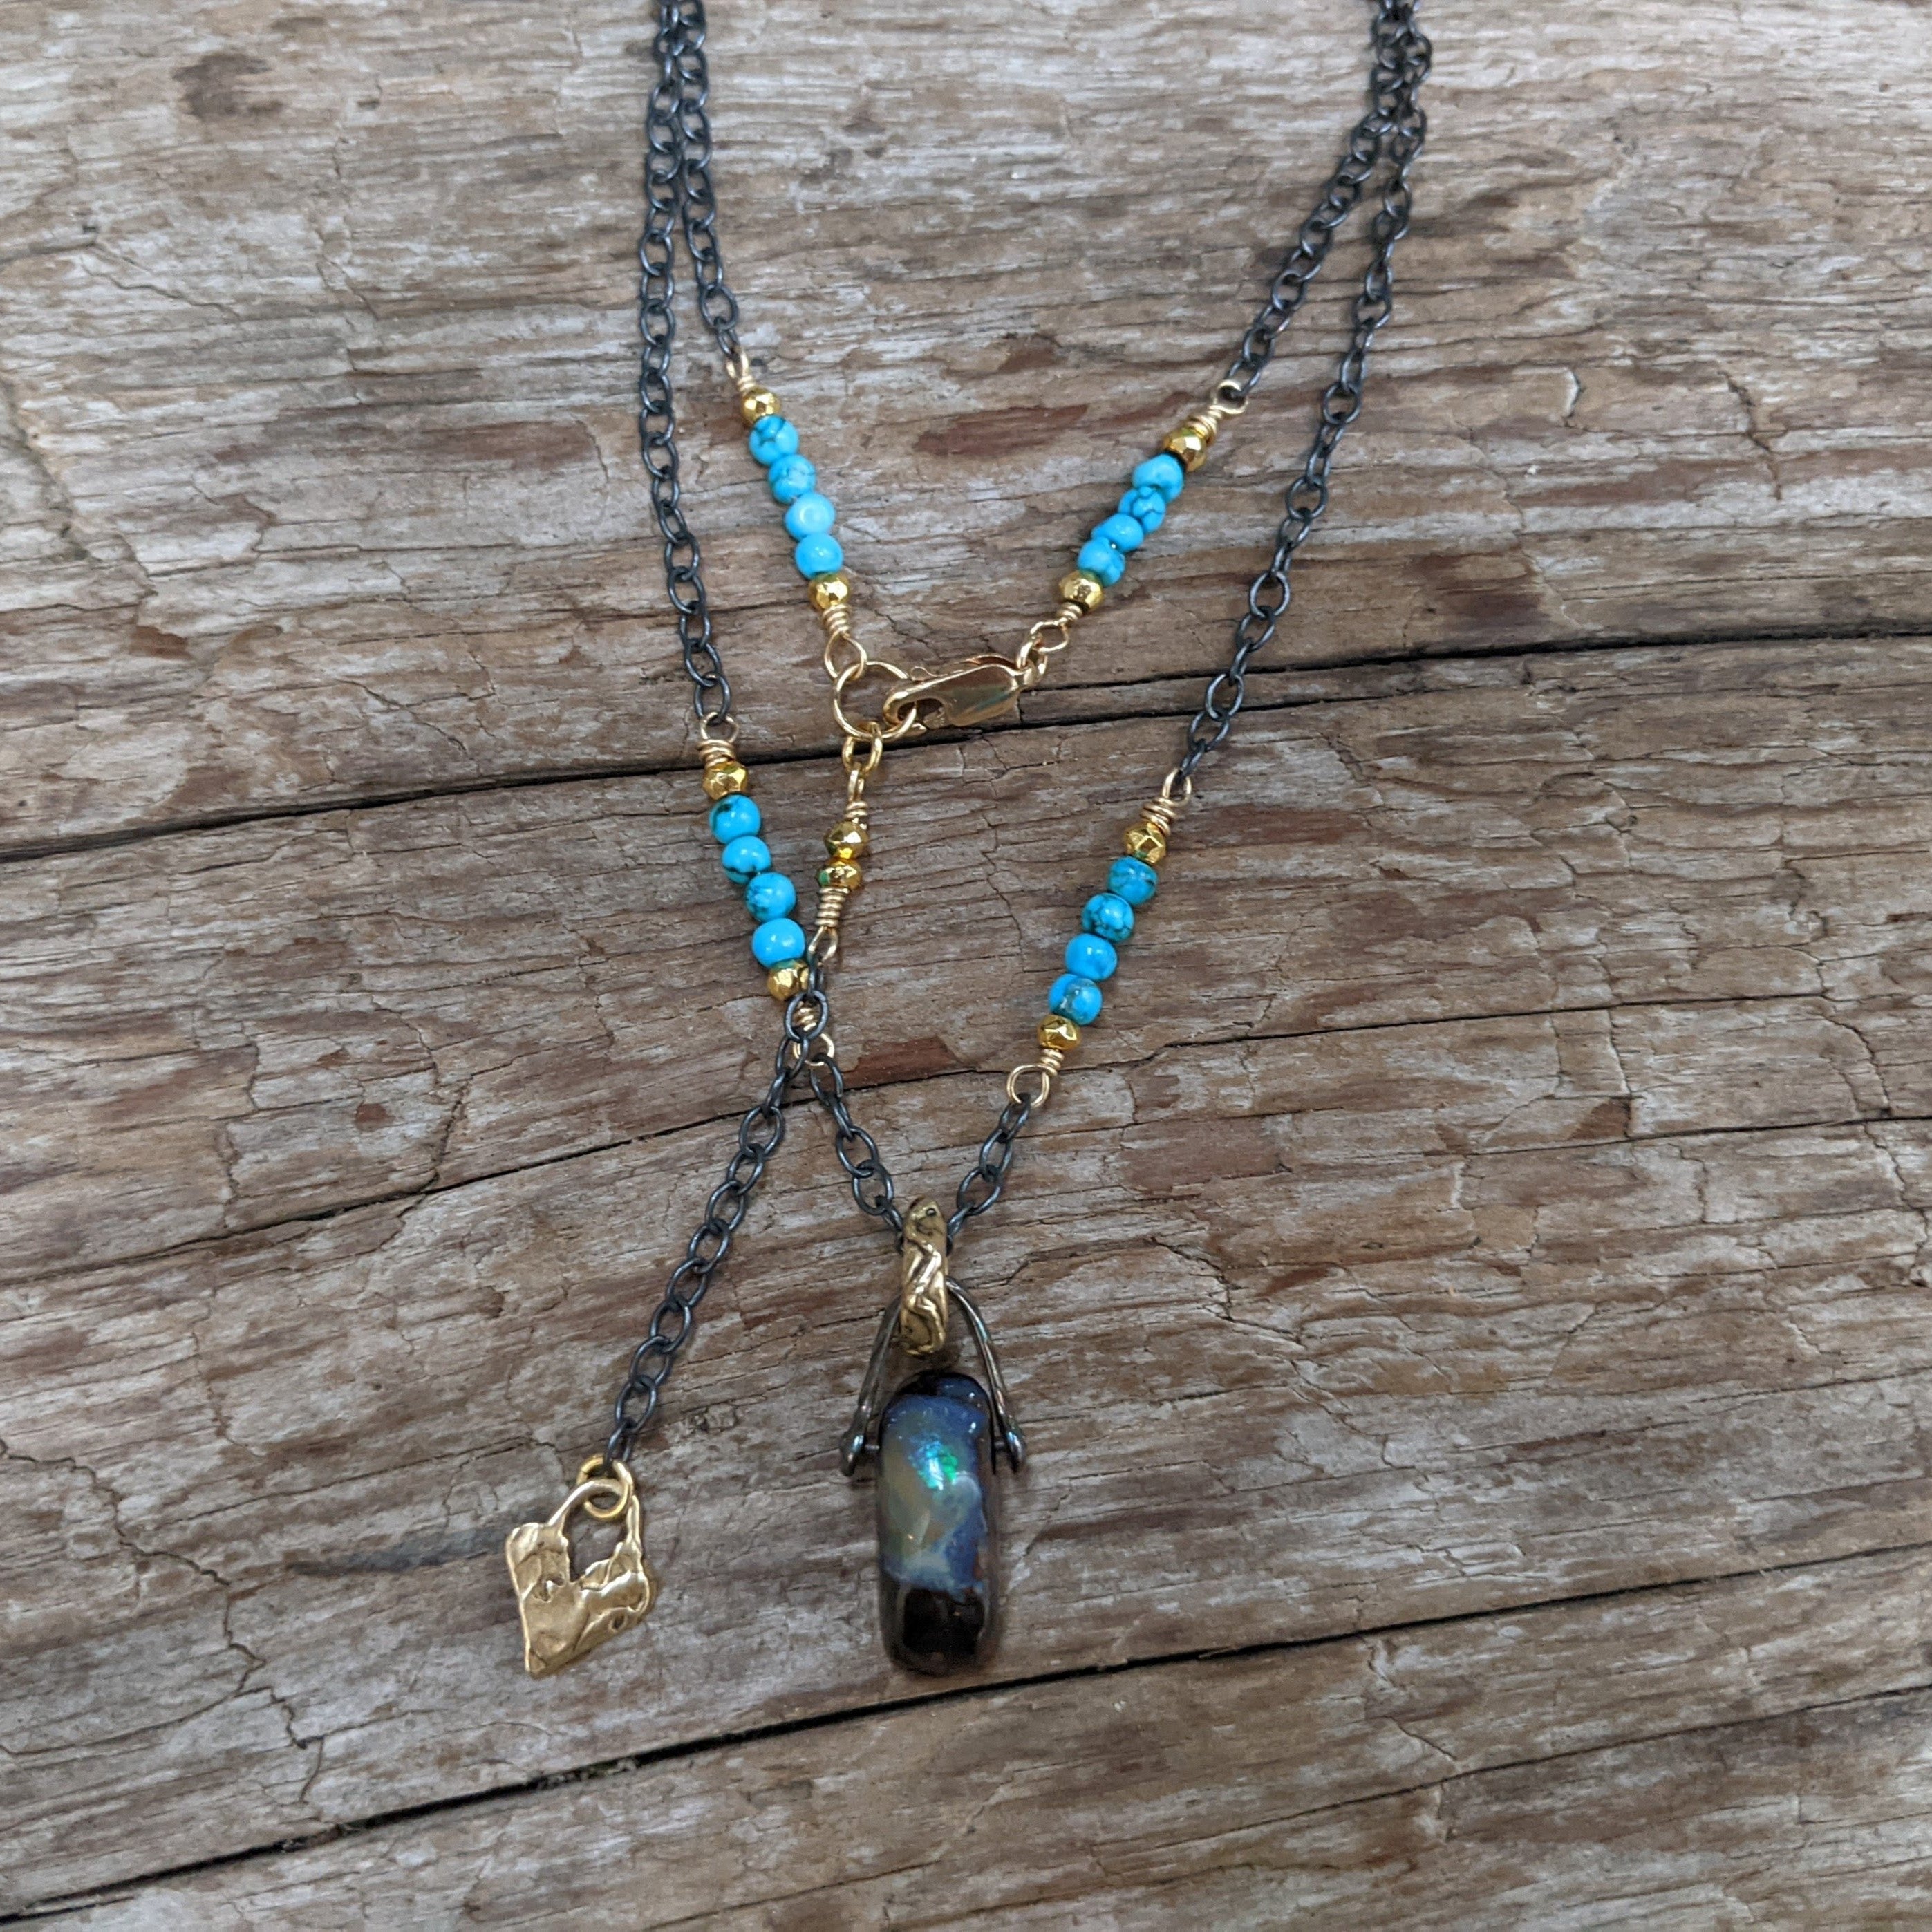 Australian koroit boulder opal necklace . Multi stone necklace. Oxidized silver chain opal and turquoise necklace. Organic  statement necklace handcrafted by Aurora Creative Jewellery. 